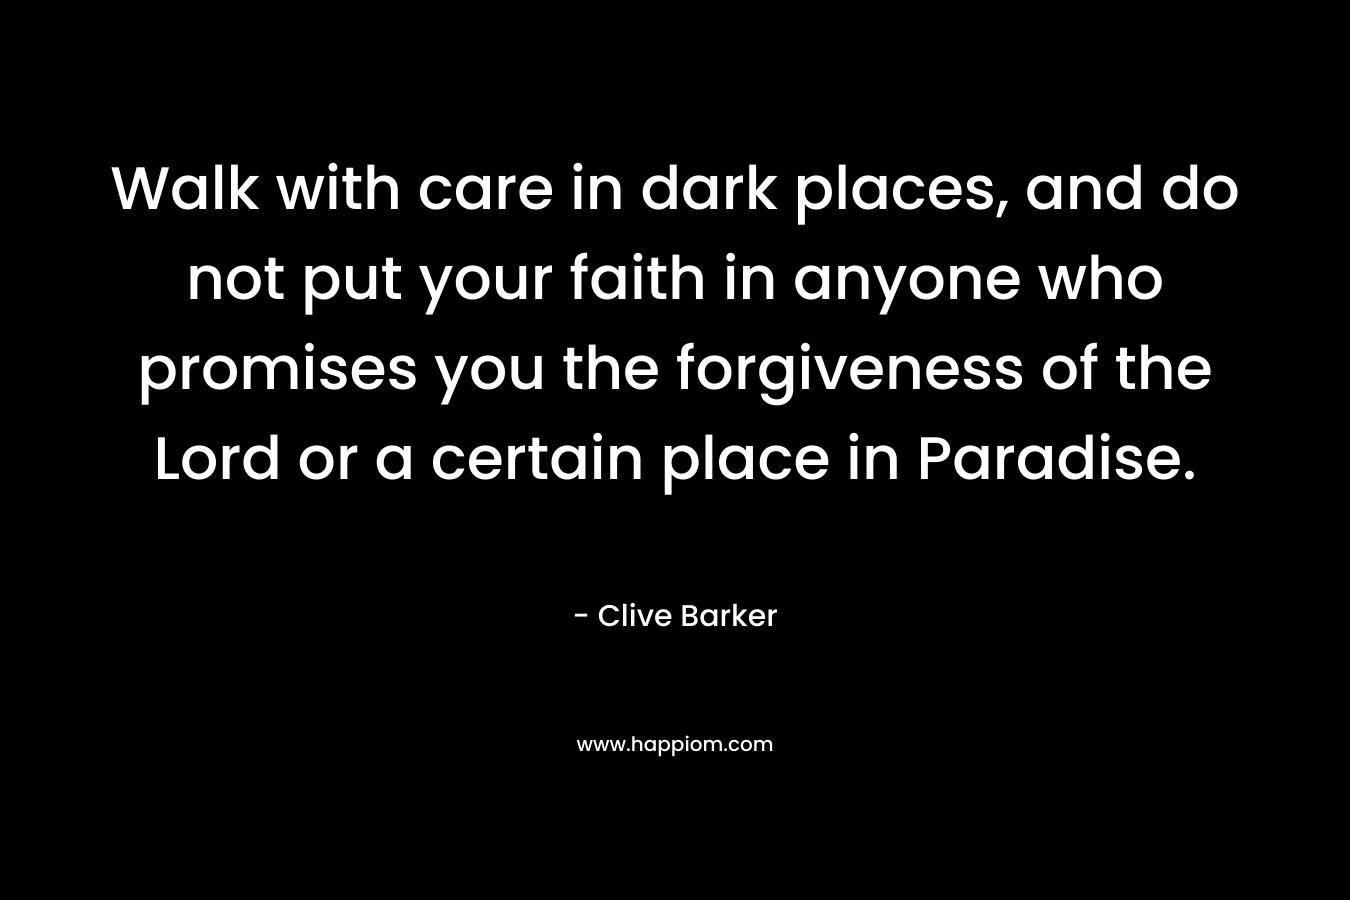 Walk with care in dark places, and do not put your faith in anyone who promises you the forgiveness of the Lord or a certain place in Paradise. – Clive Barker